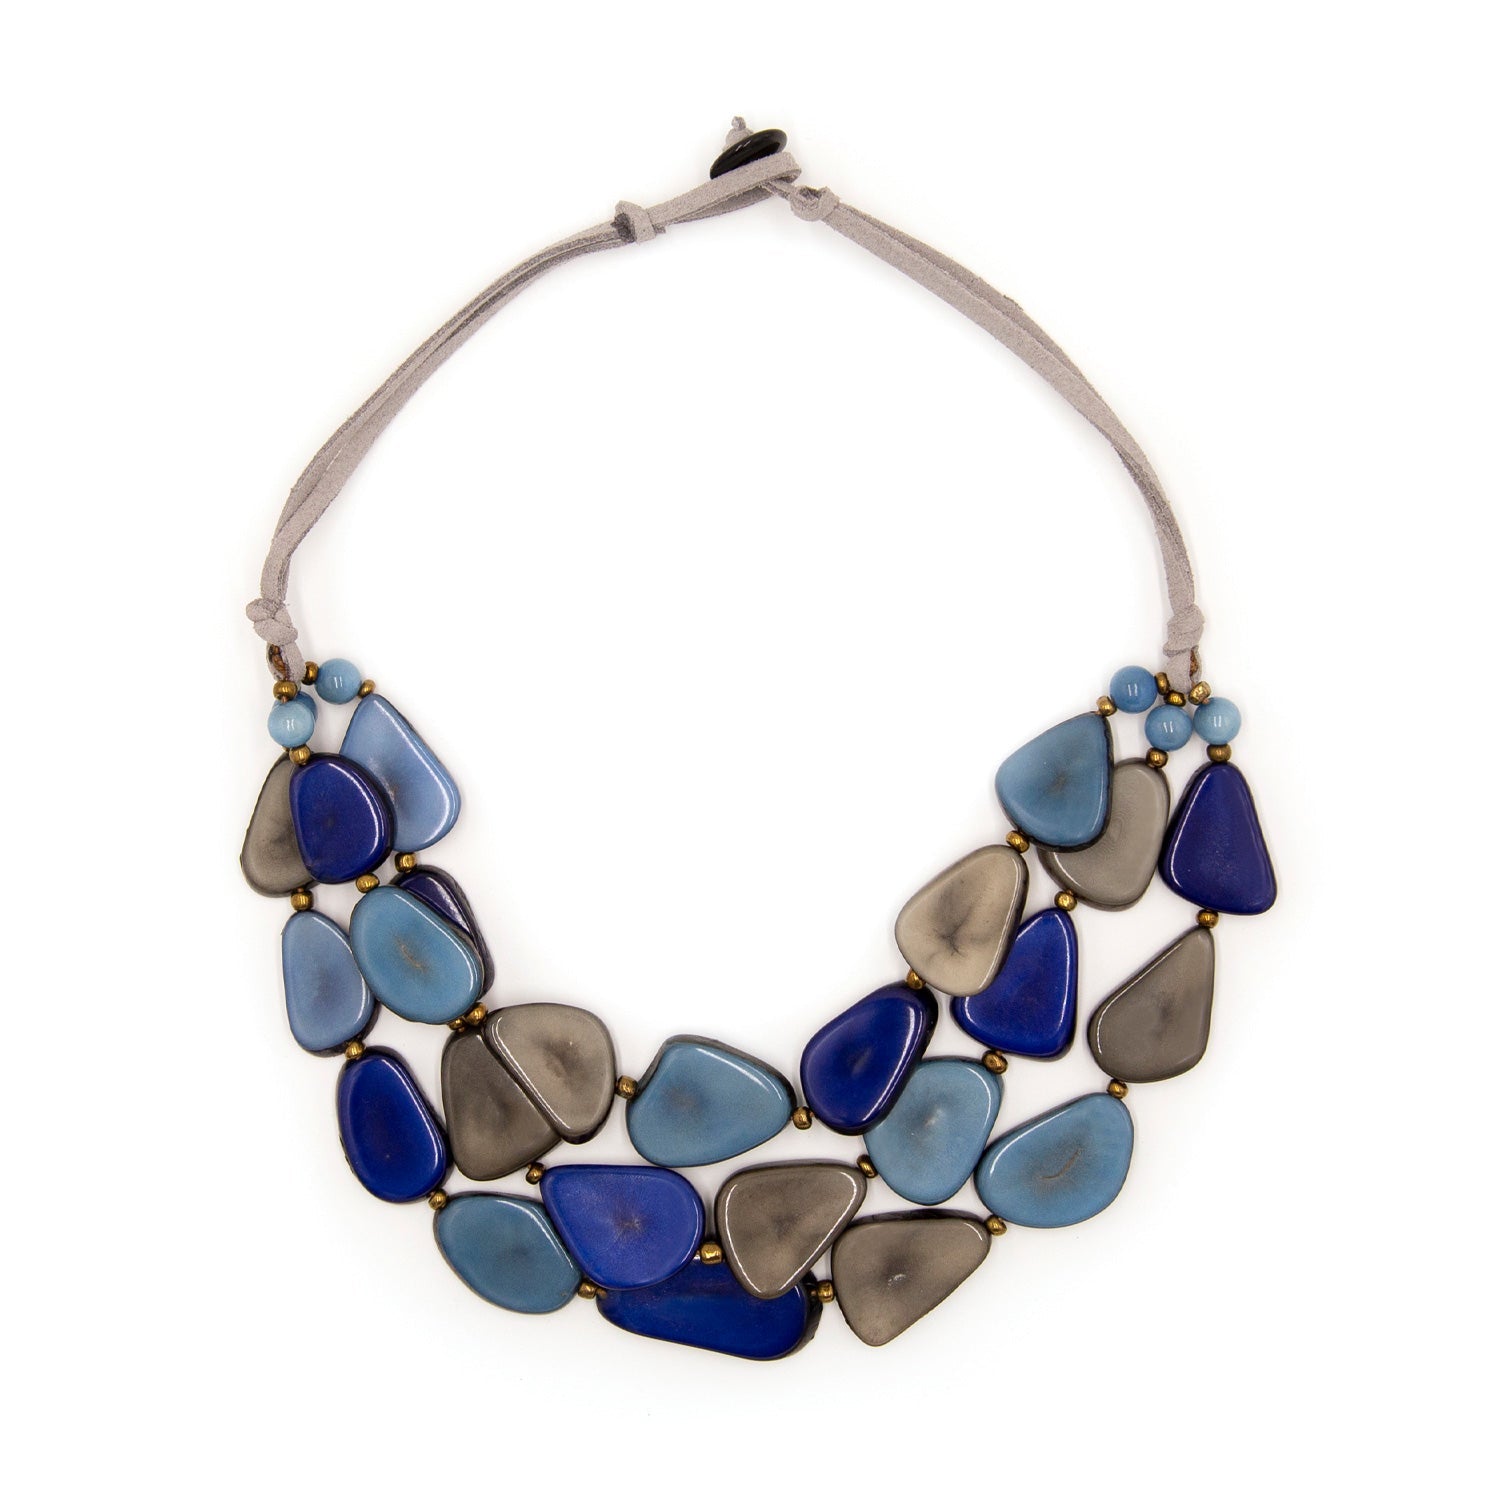 Organic Tagua "Alma" Necklace in Biscayne Bay, Royal Blue, and Charcoal